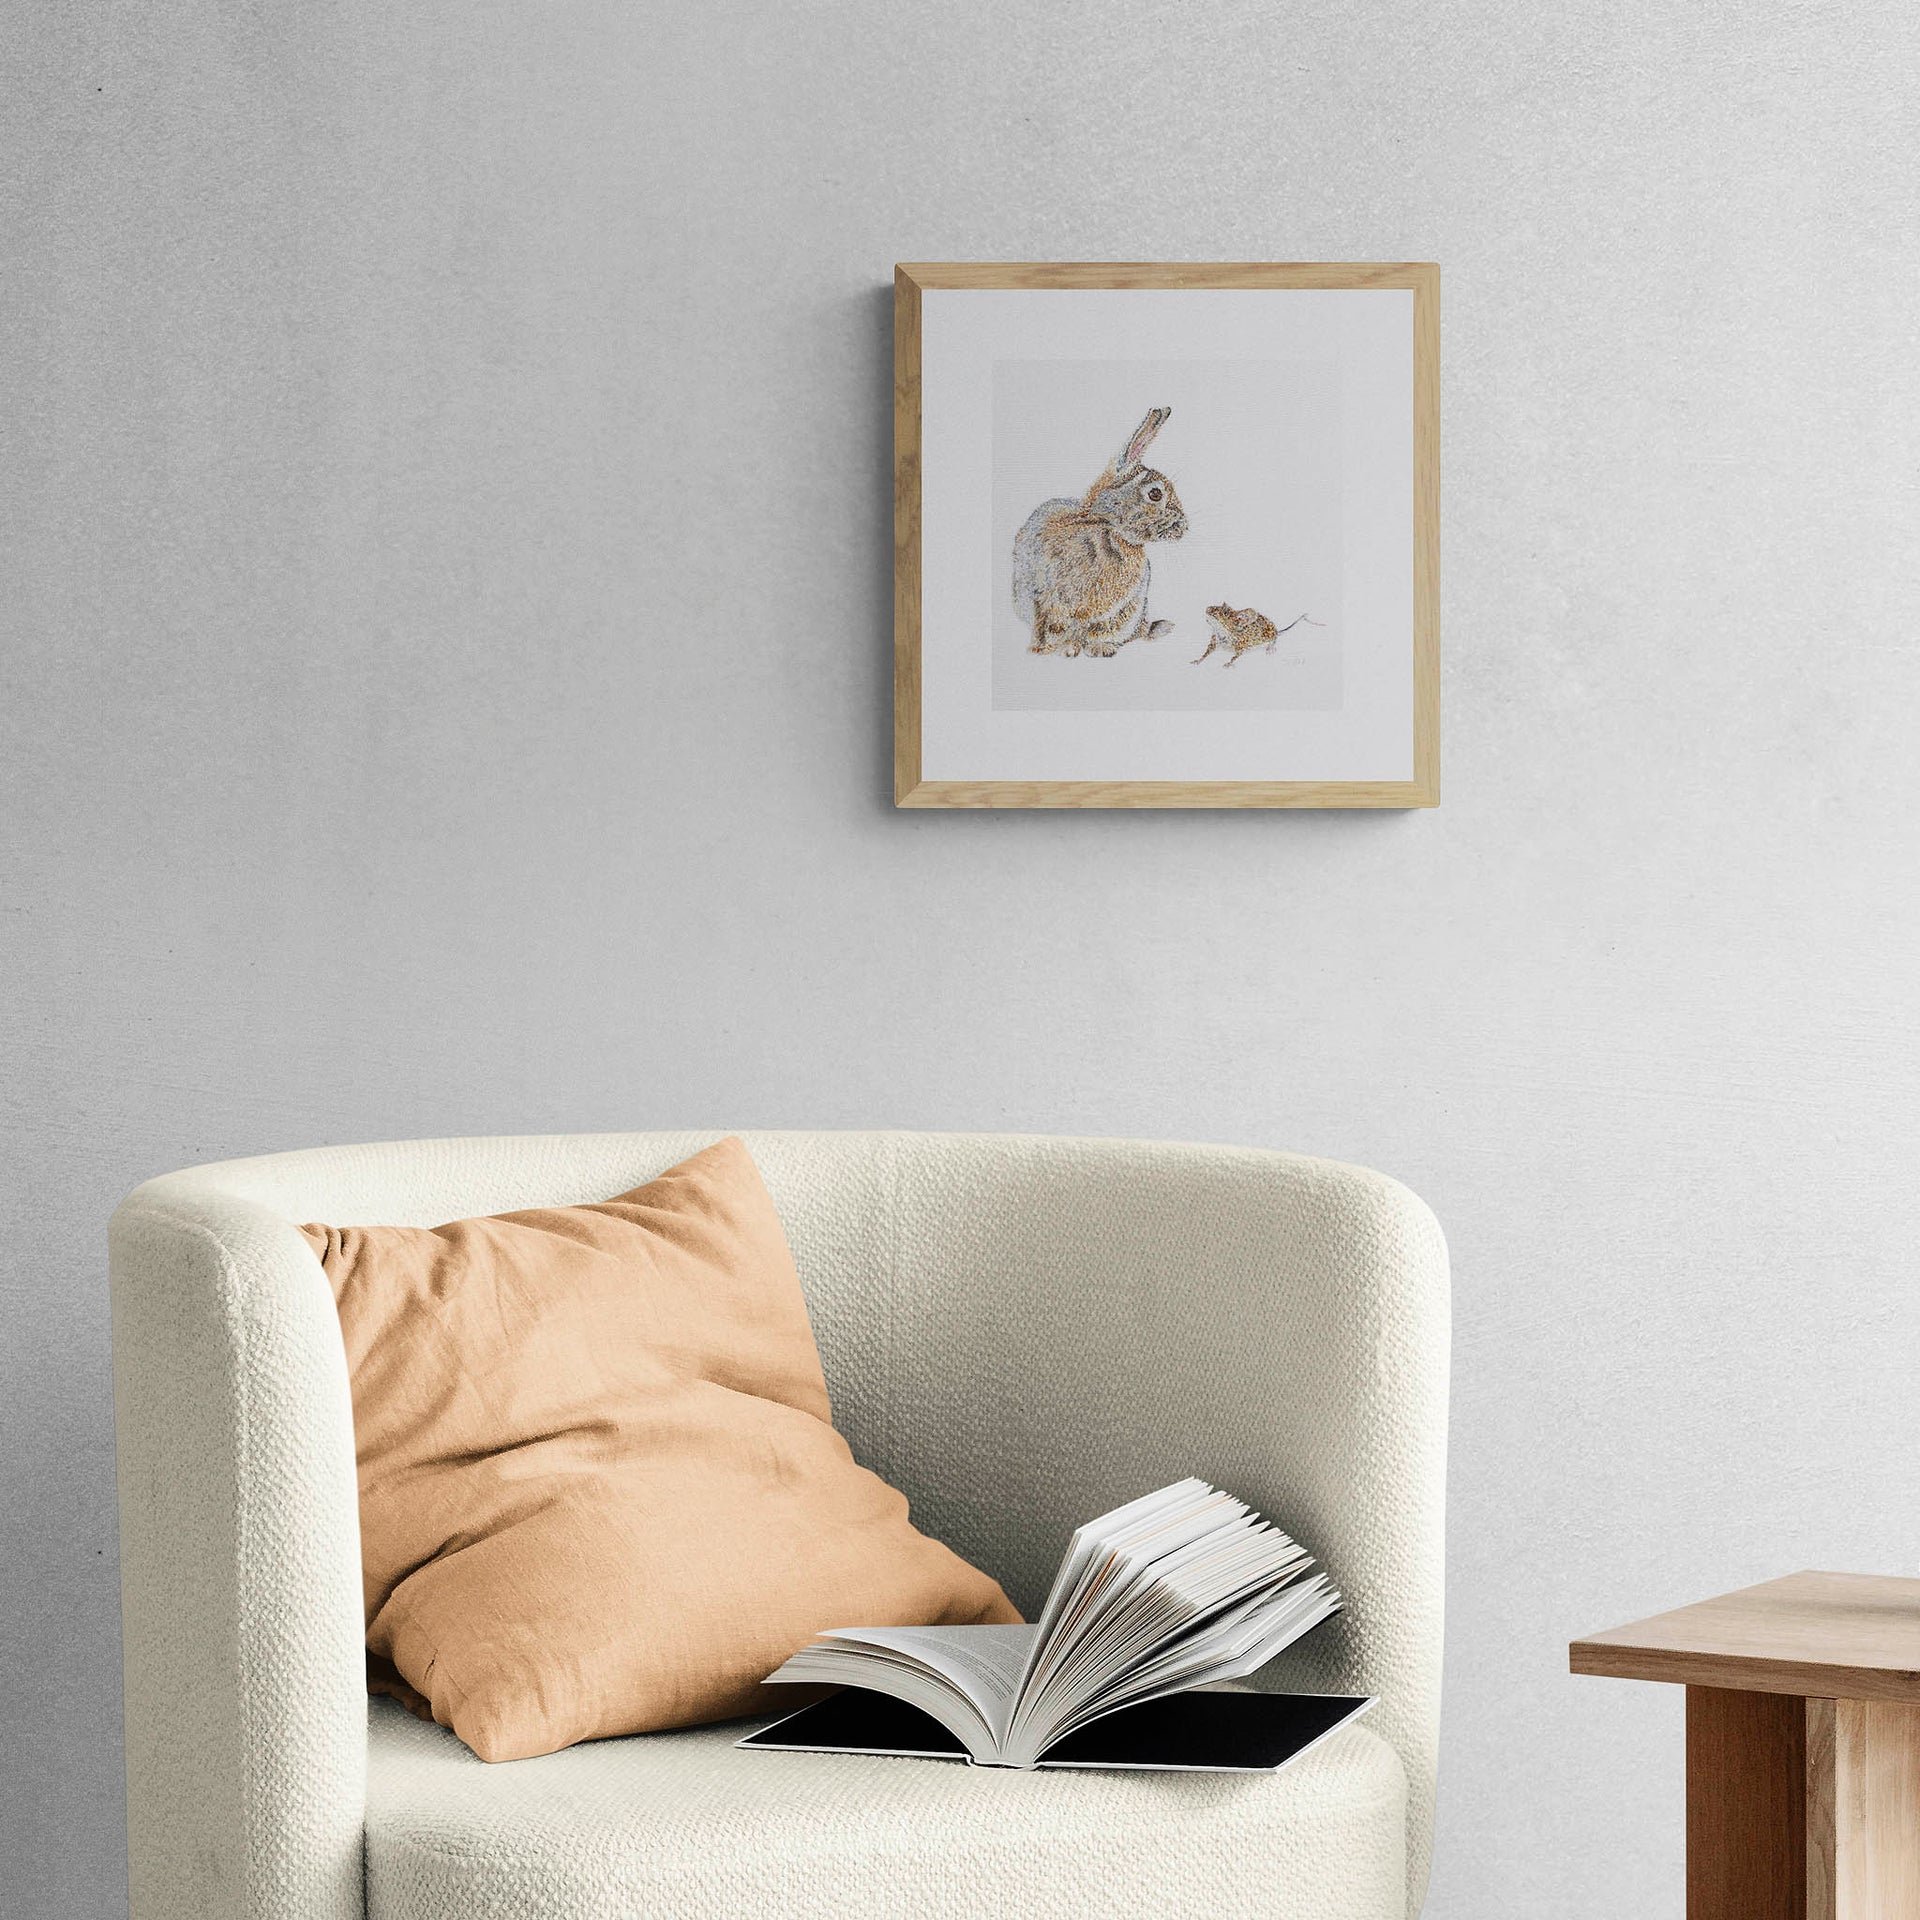 Hand embroidered rabbit and mouse artwork in wooden frame on wall